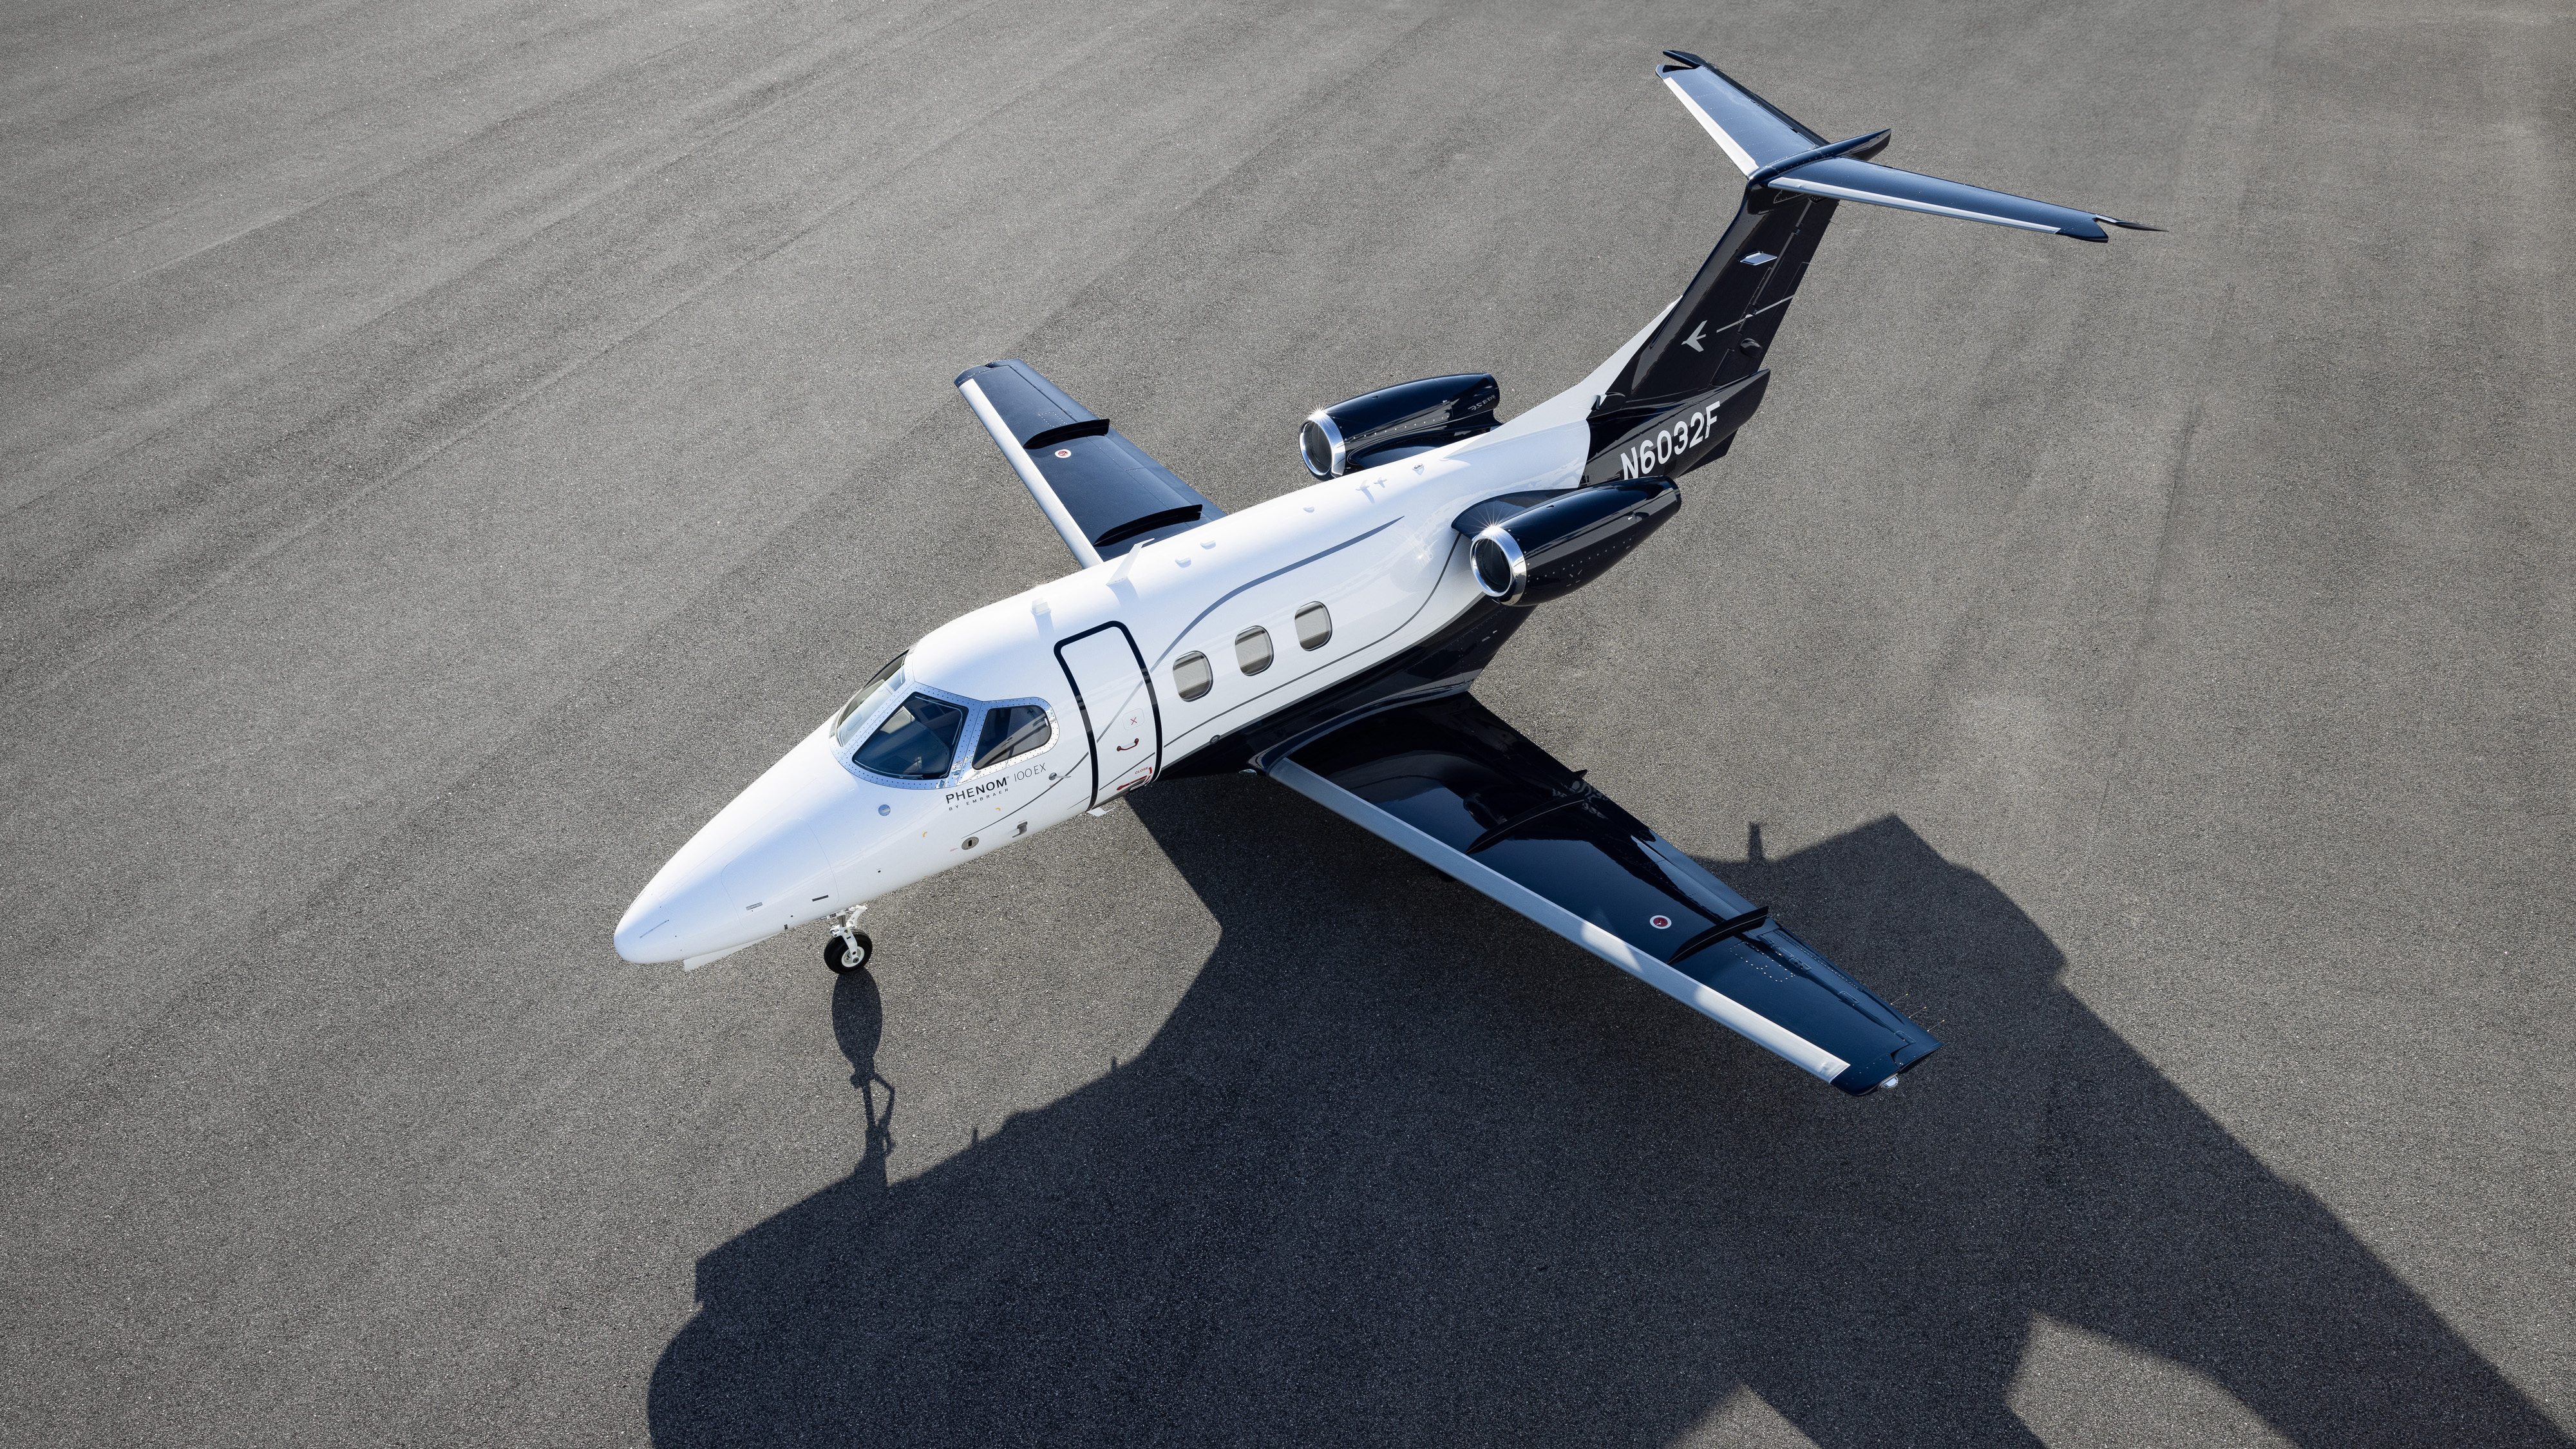 Embraer's Phenom 100EX is the latest iteration of a light jet design that has been delivered more than 400 times since 2008. Photo courtesy of Embraer.